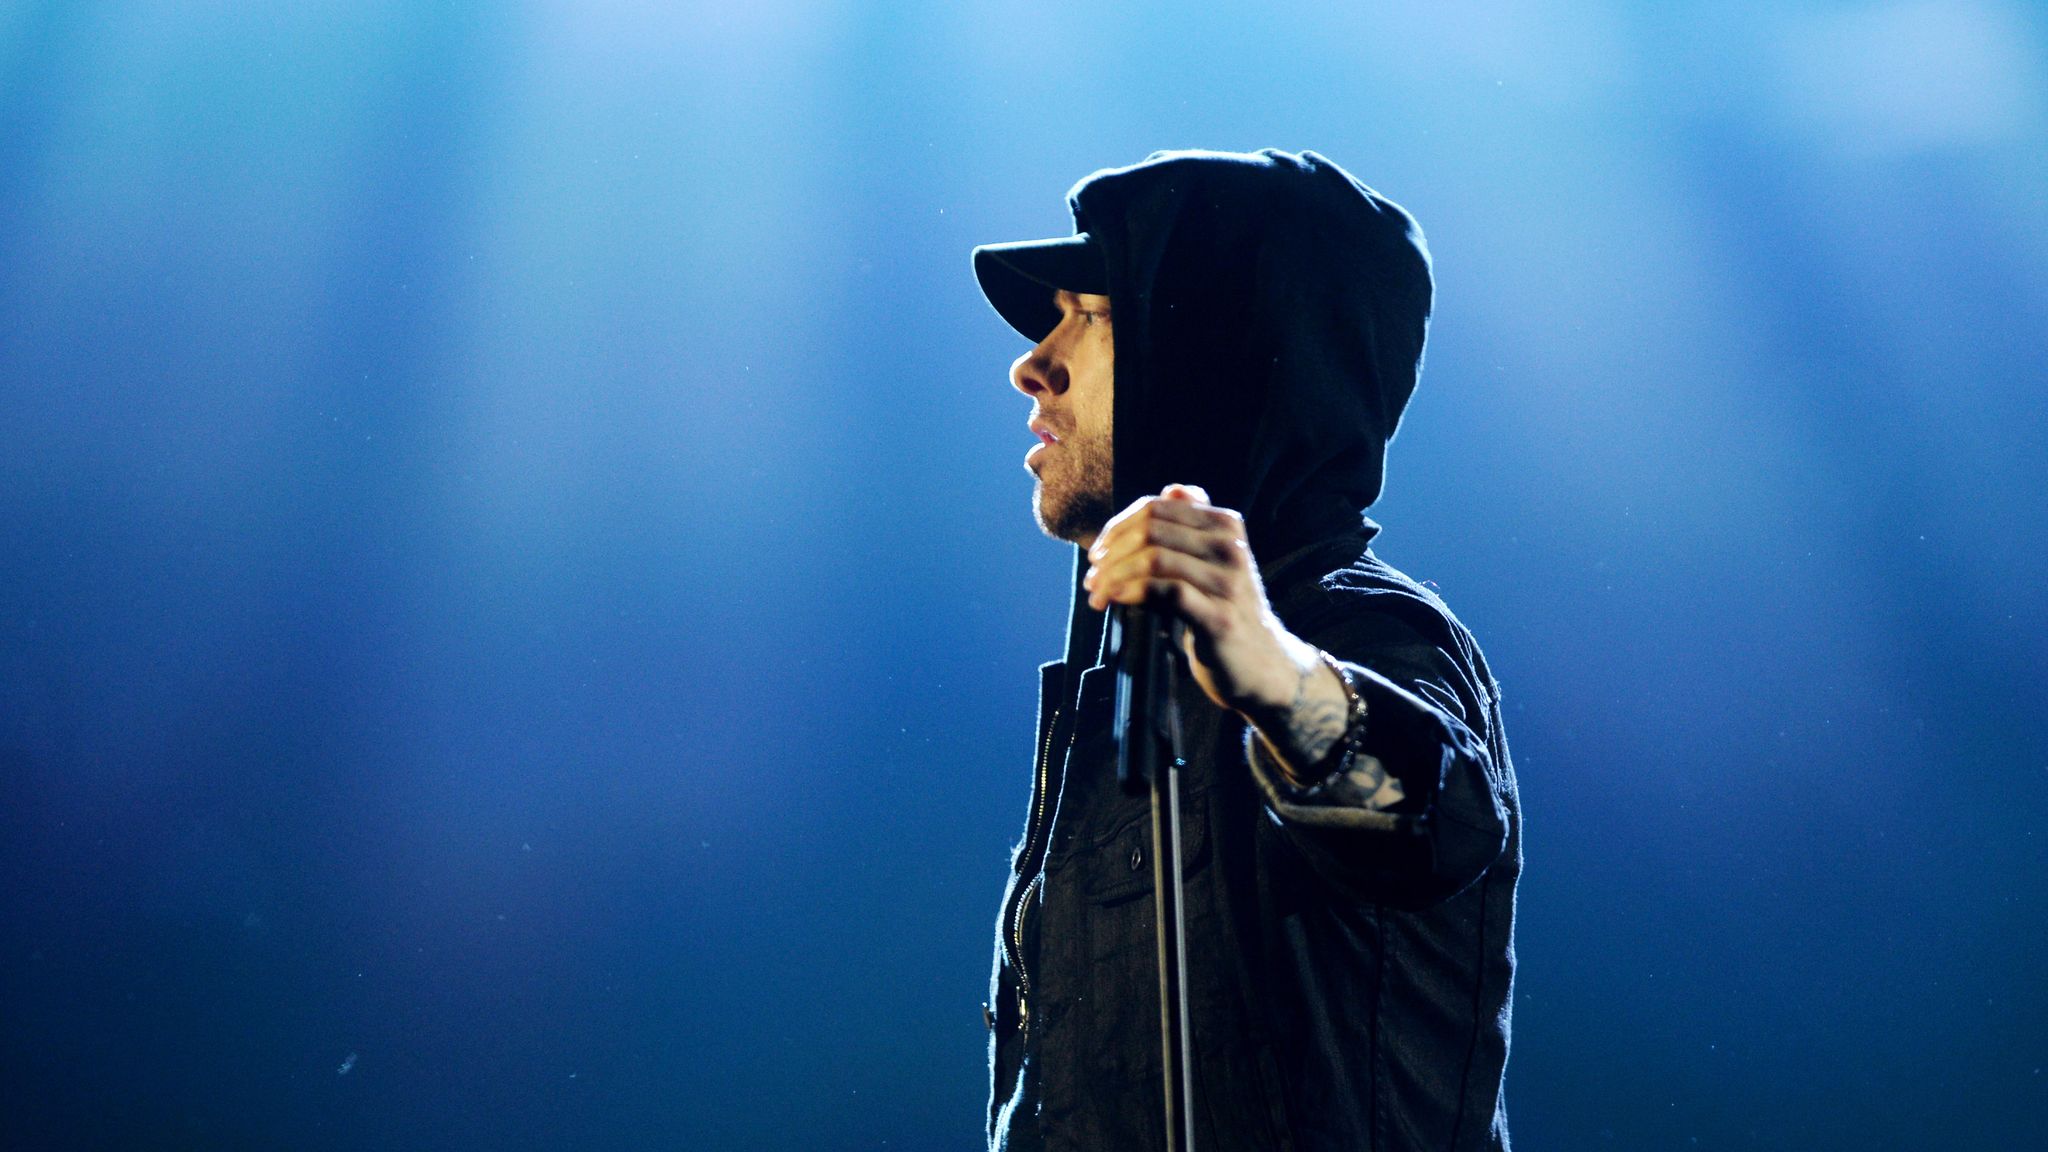 Eminem world tour The rapper is back and heading for Twickenham